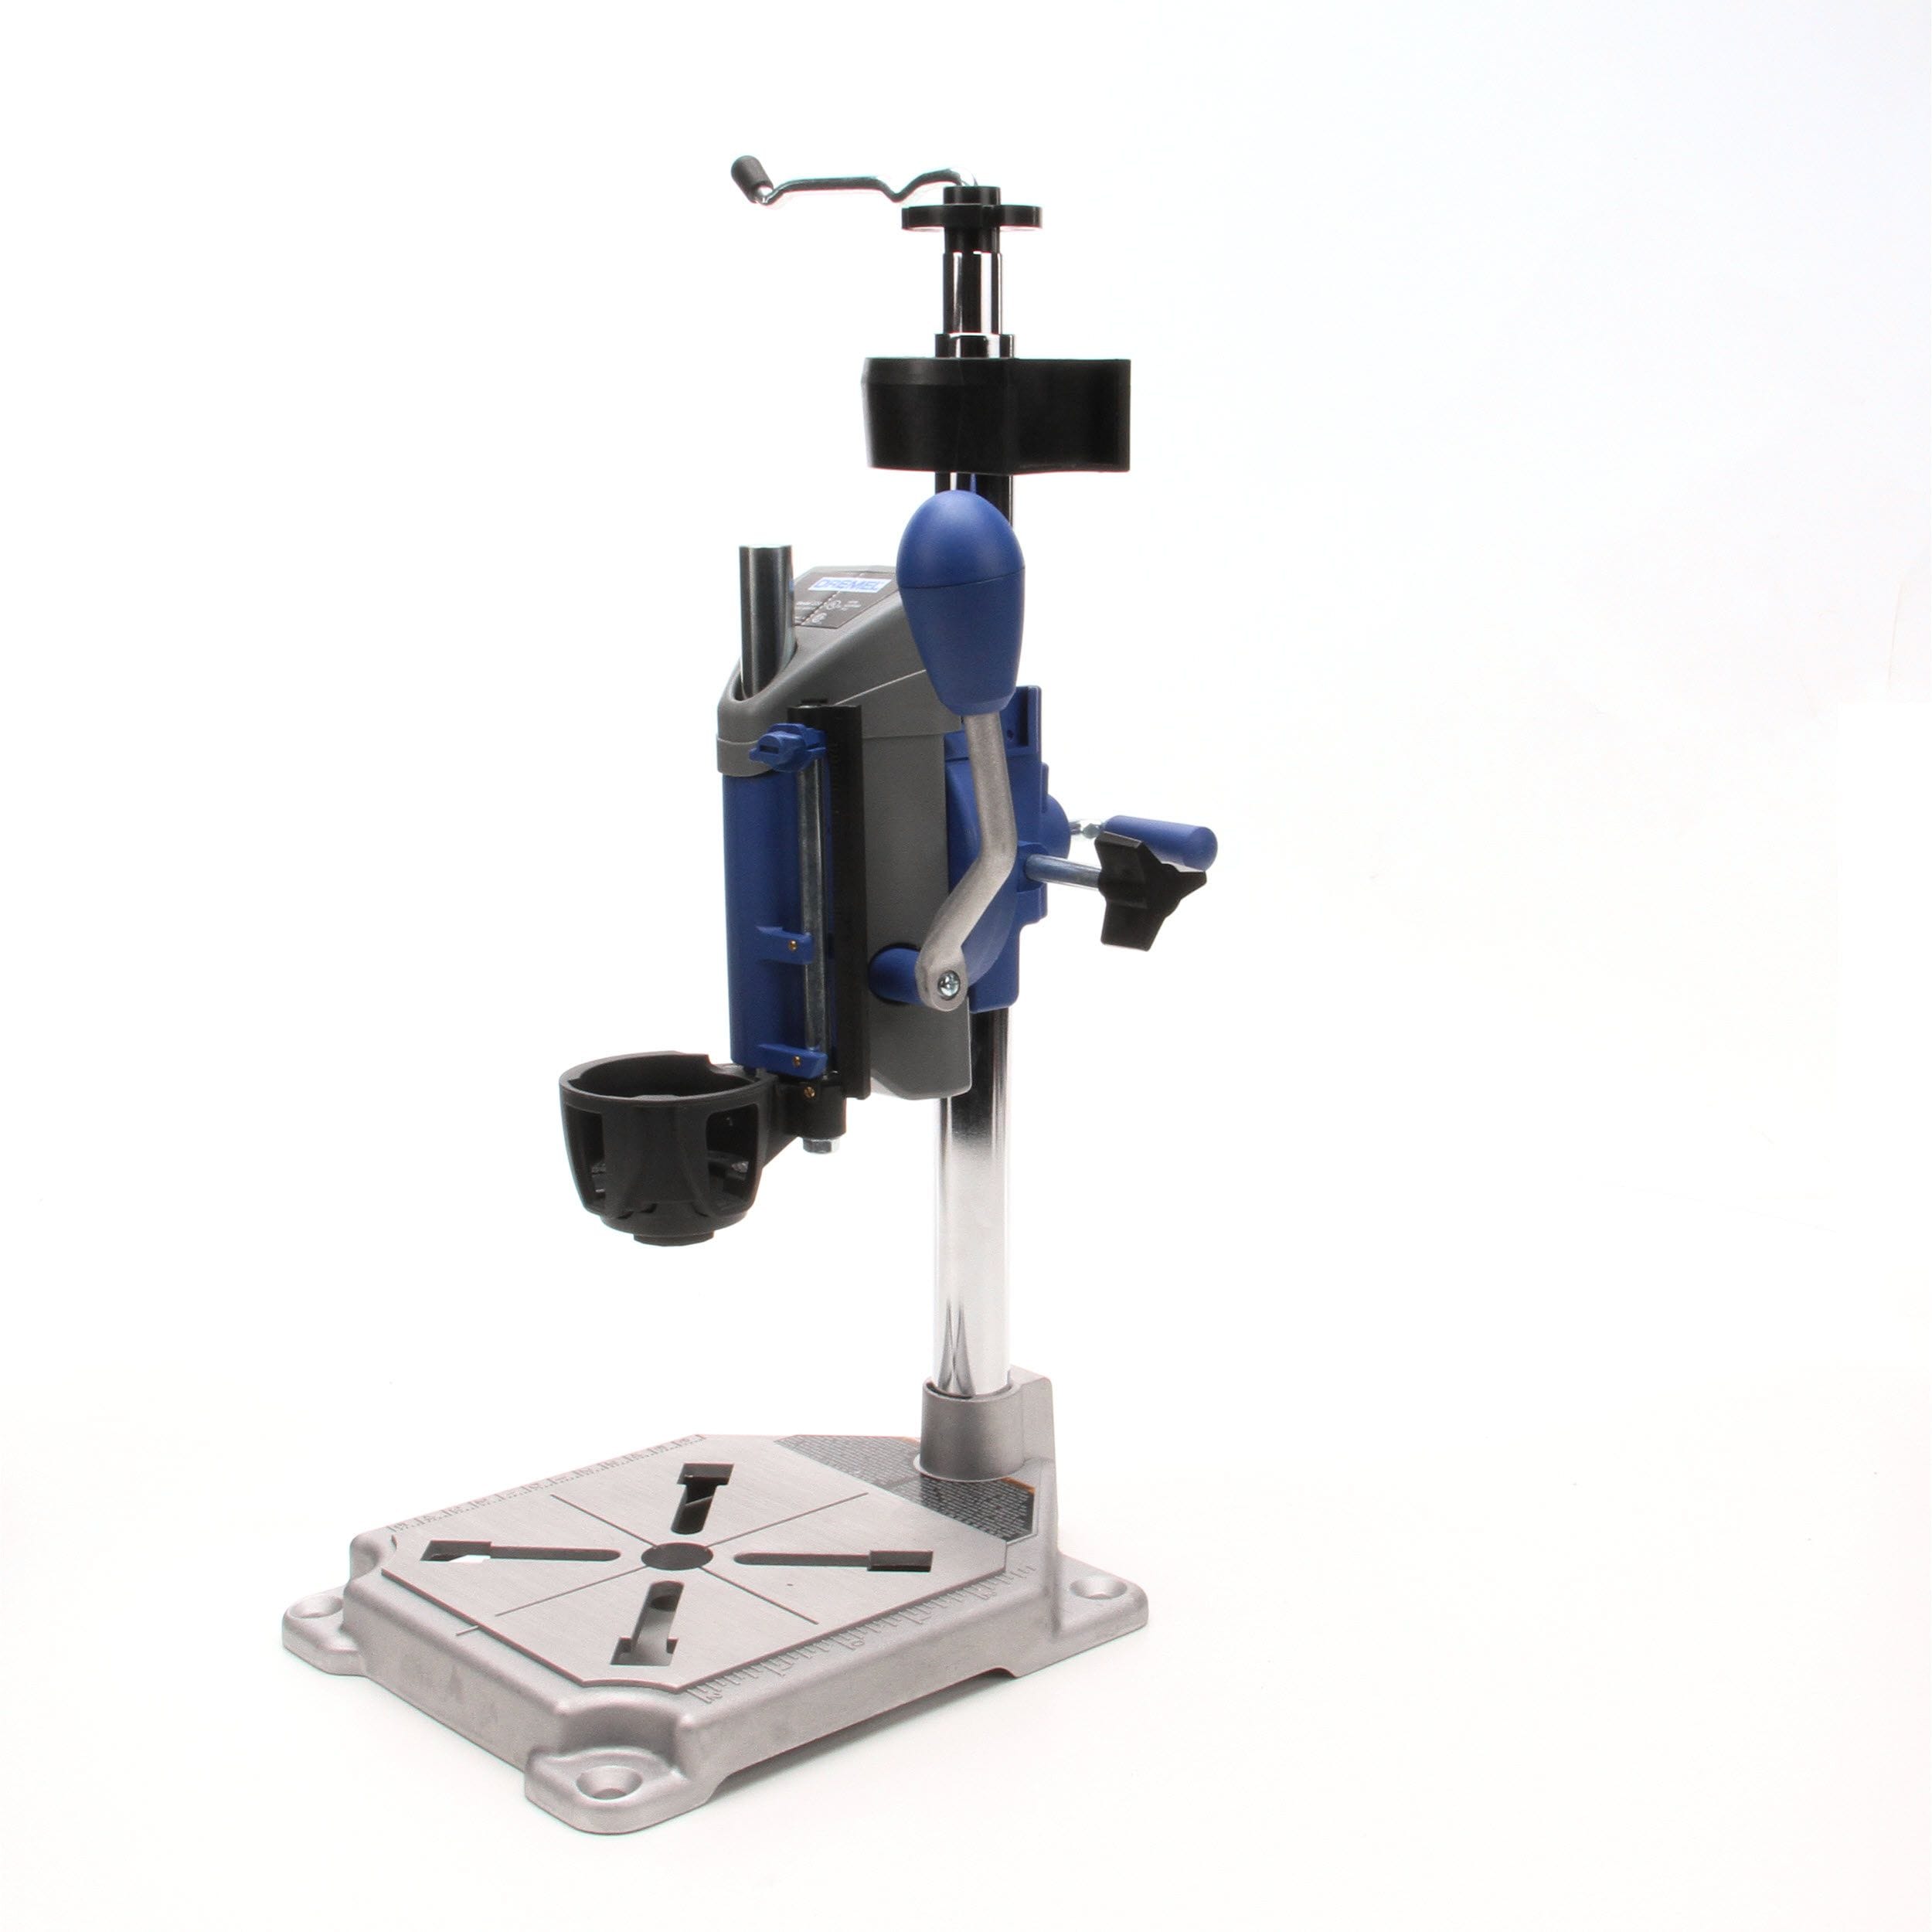 Dremel 220-01 Rotary Tool Workstation Drill Press Work Station with Wrench …